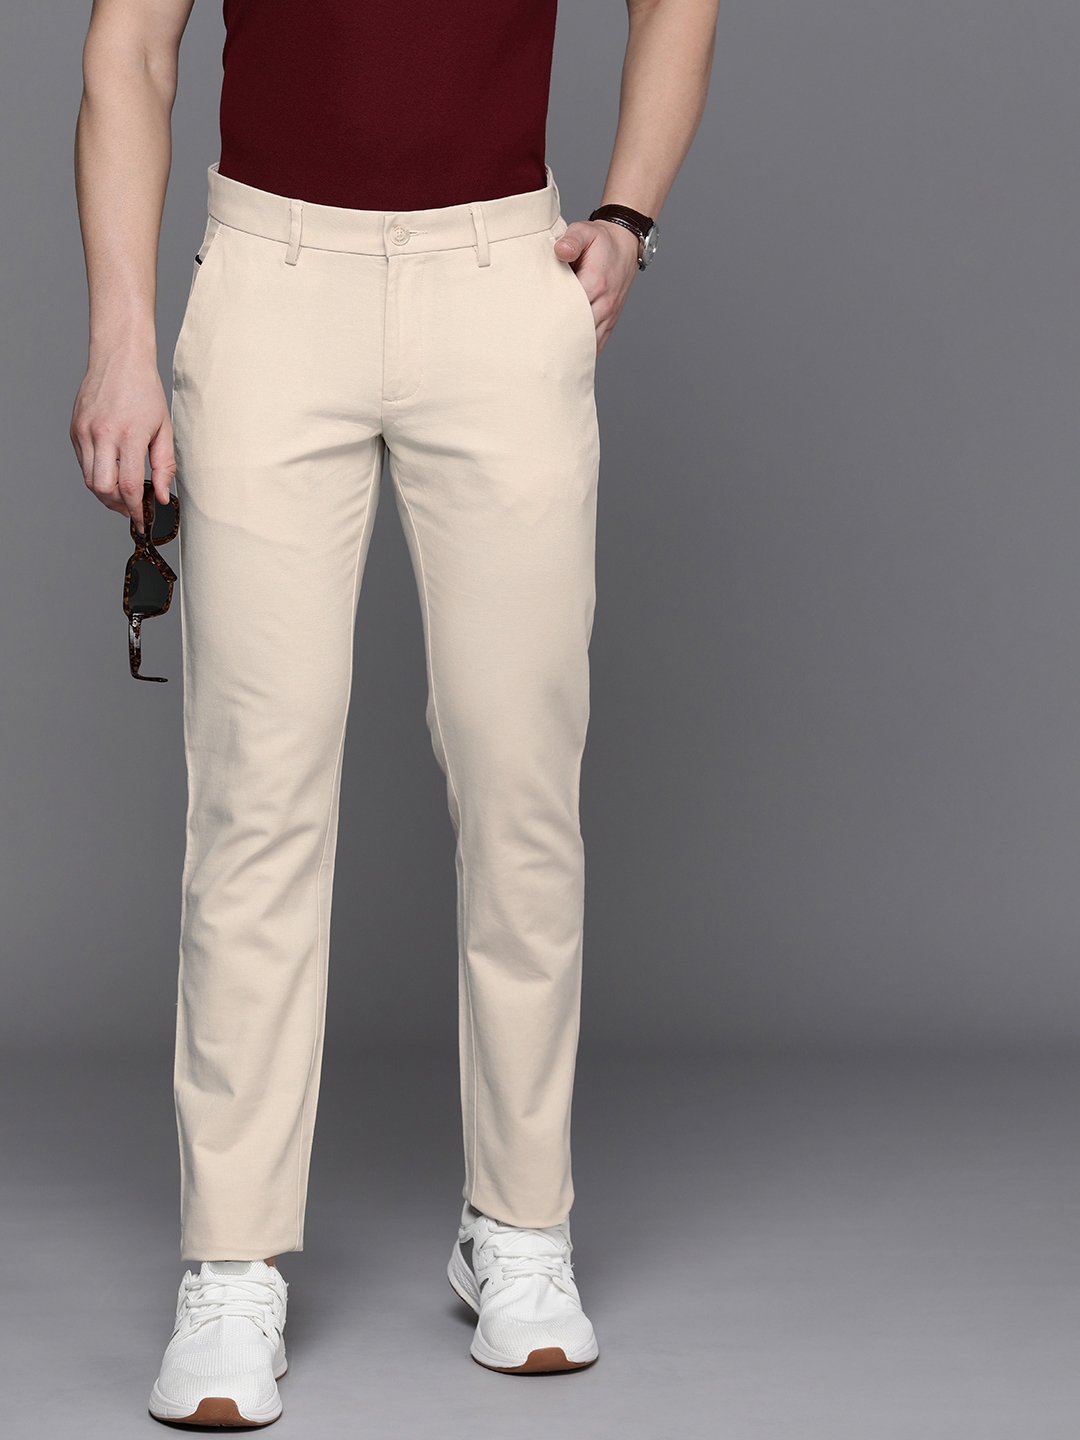 Allen Solly Casual Trousers, Allen Solly Brown Trousers for Men at